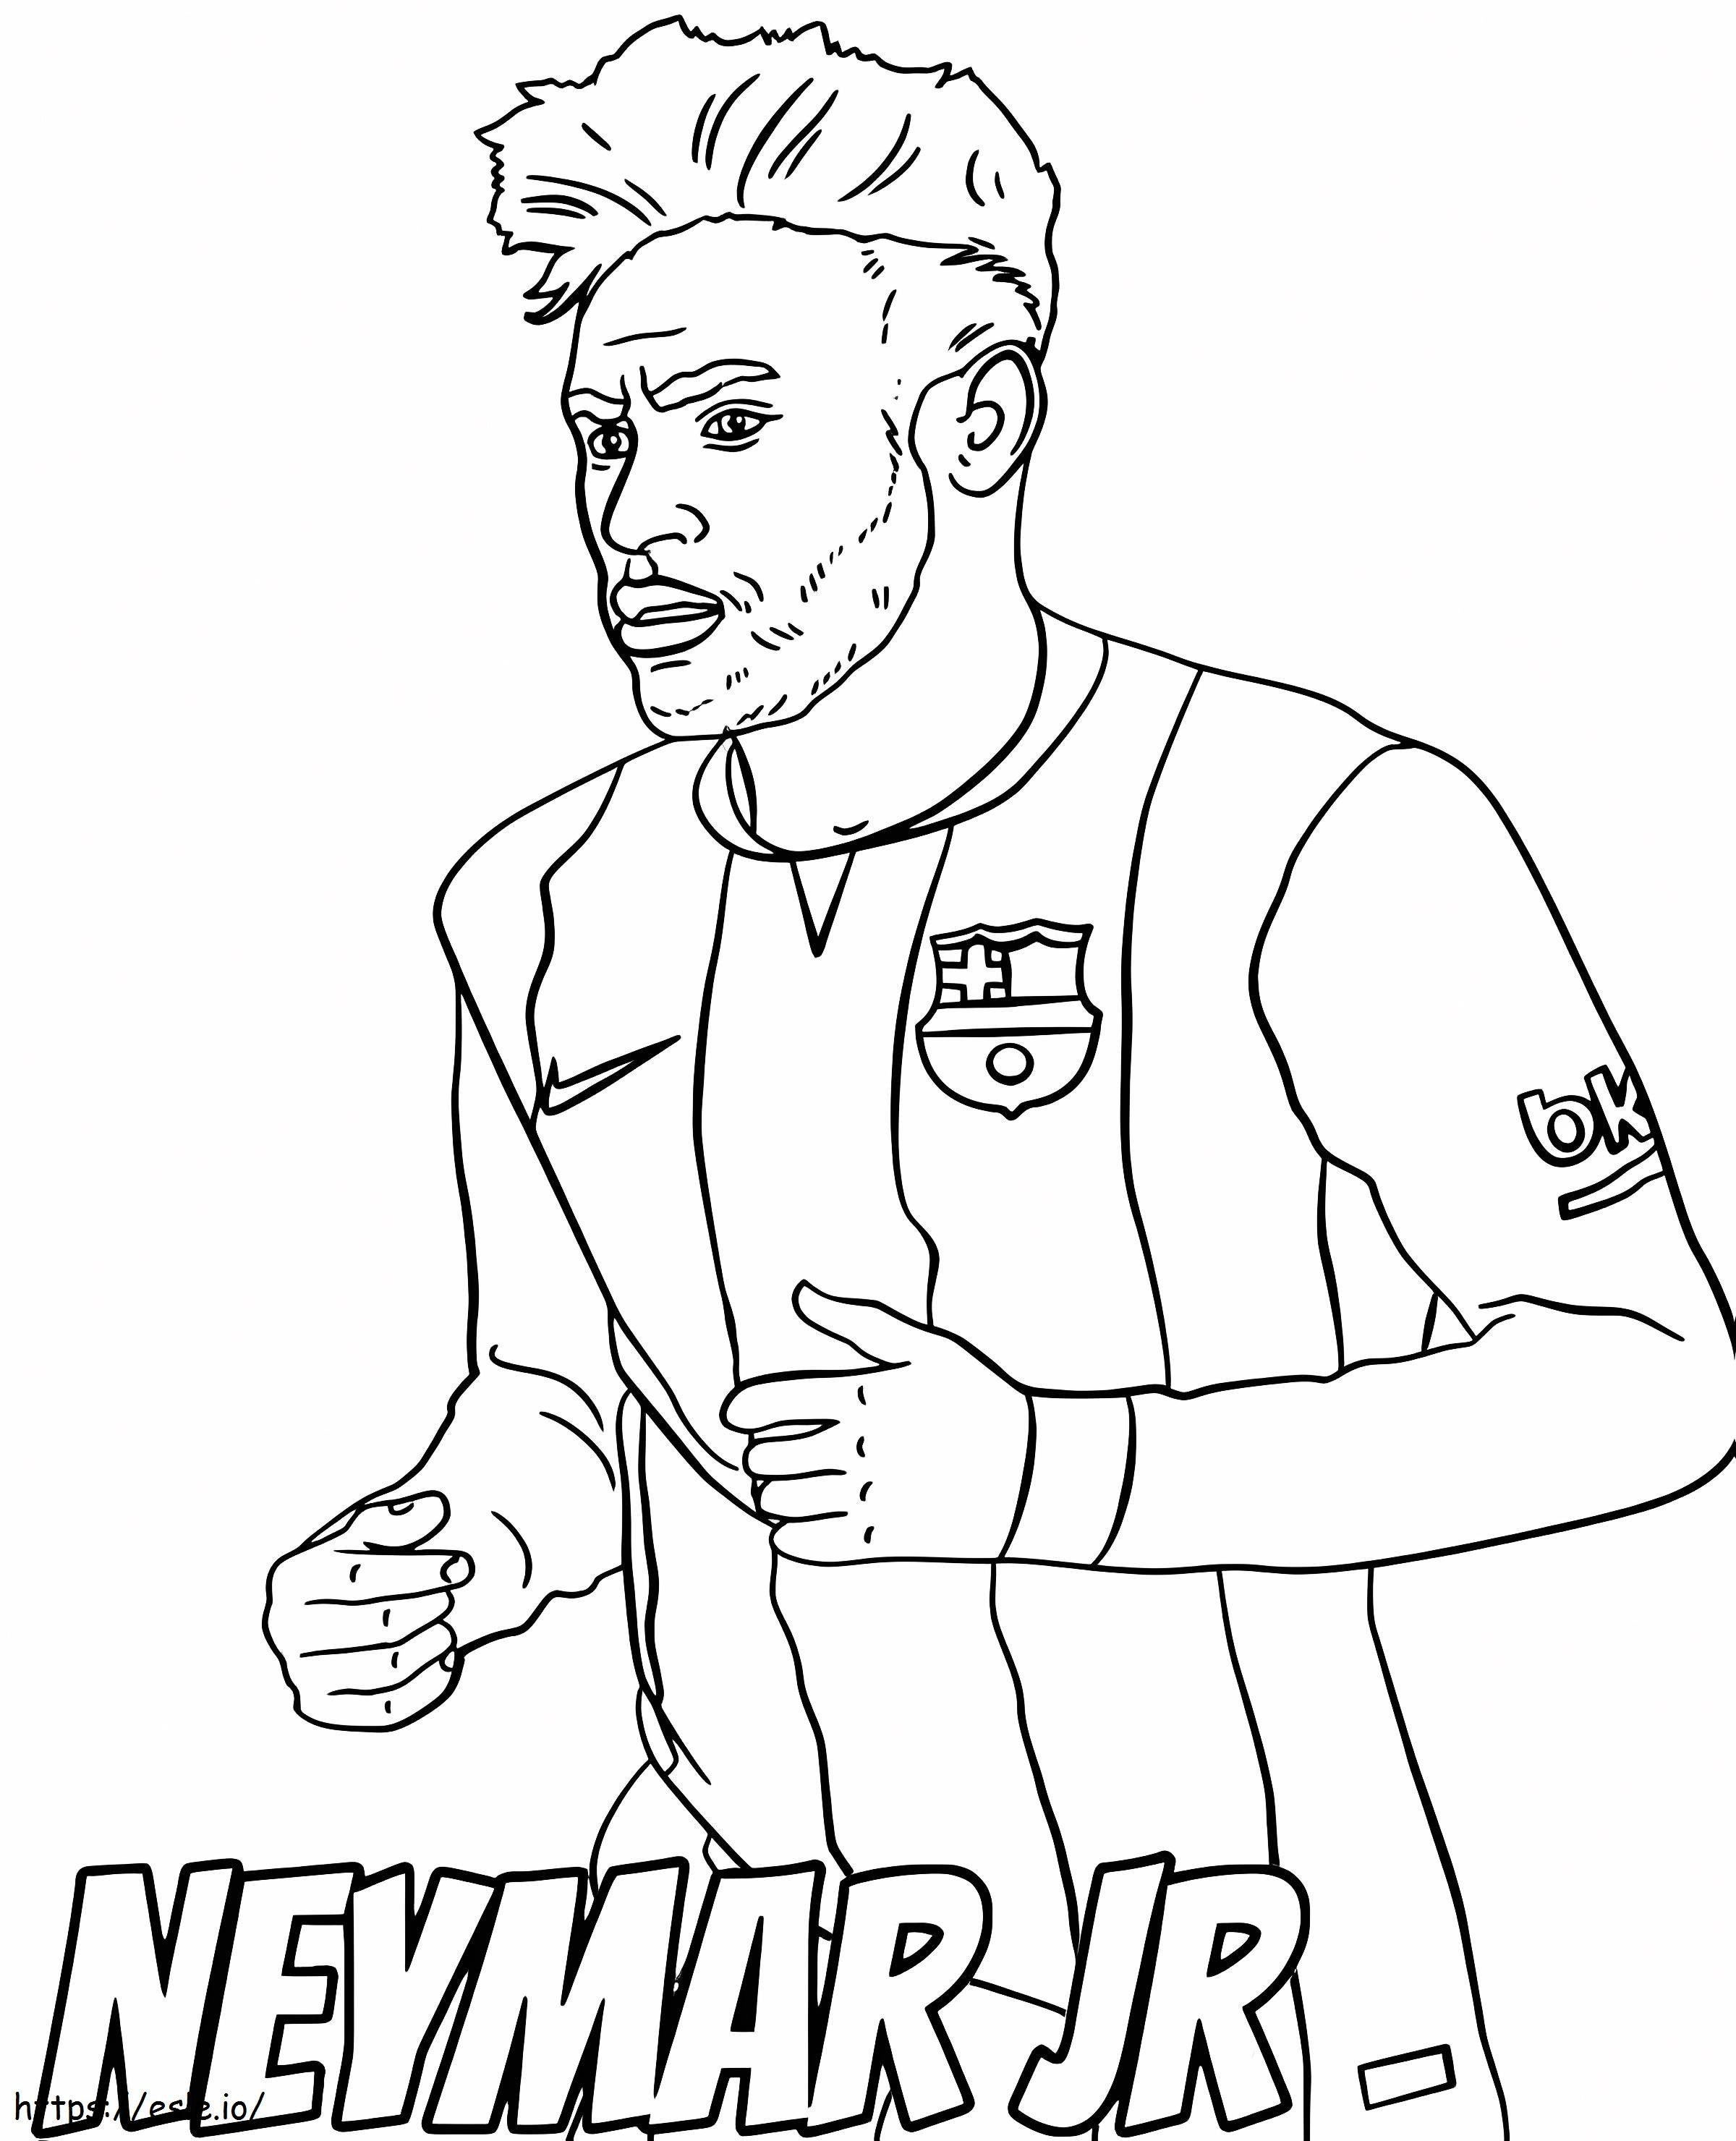 Neymar 1 coloring page